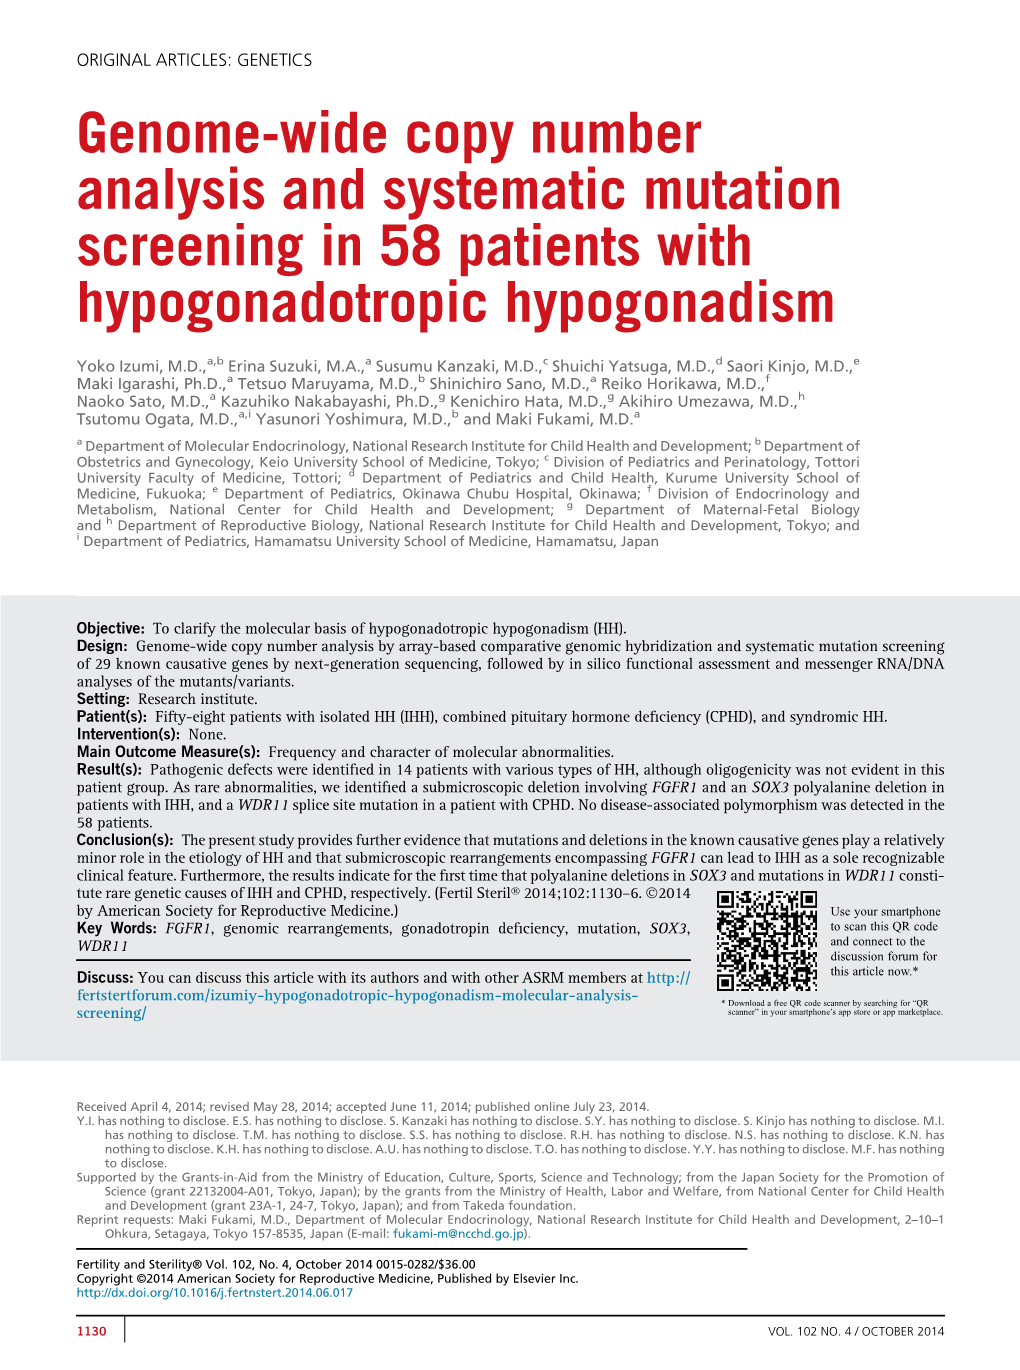 Genome-Wide Copy Number Analysis and Systematic Mutation Screening in 58 Patients with Hypogonadotropic Hypogonadism